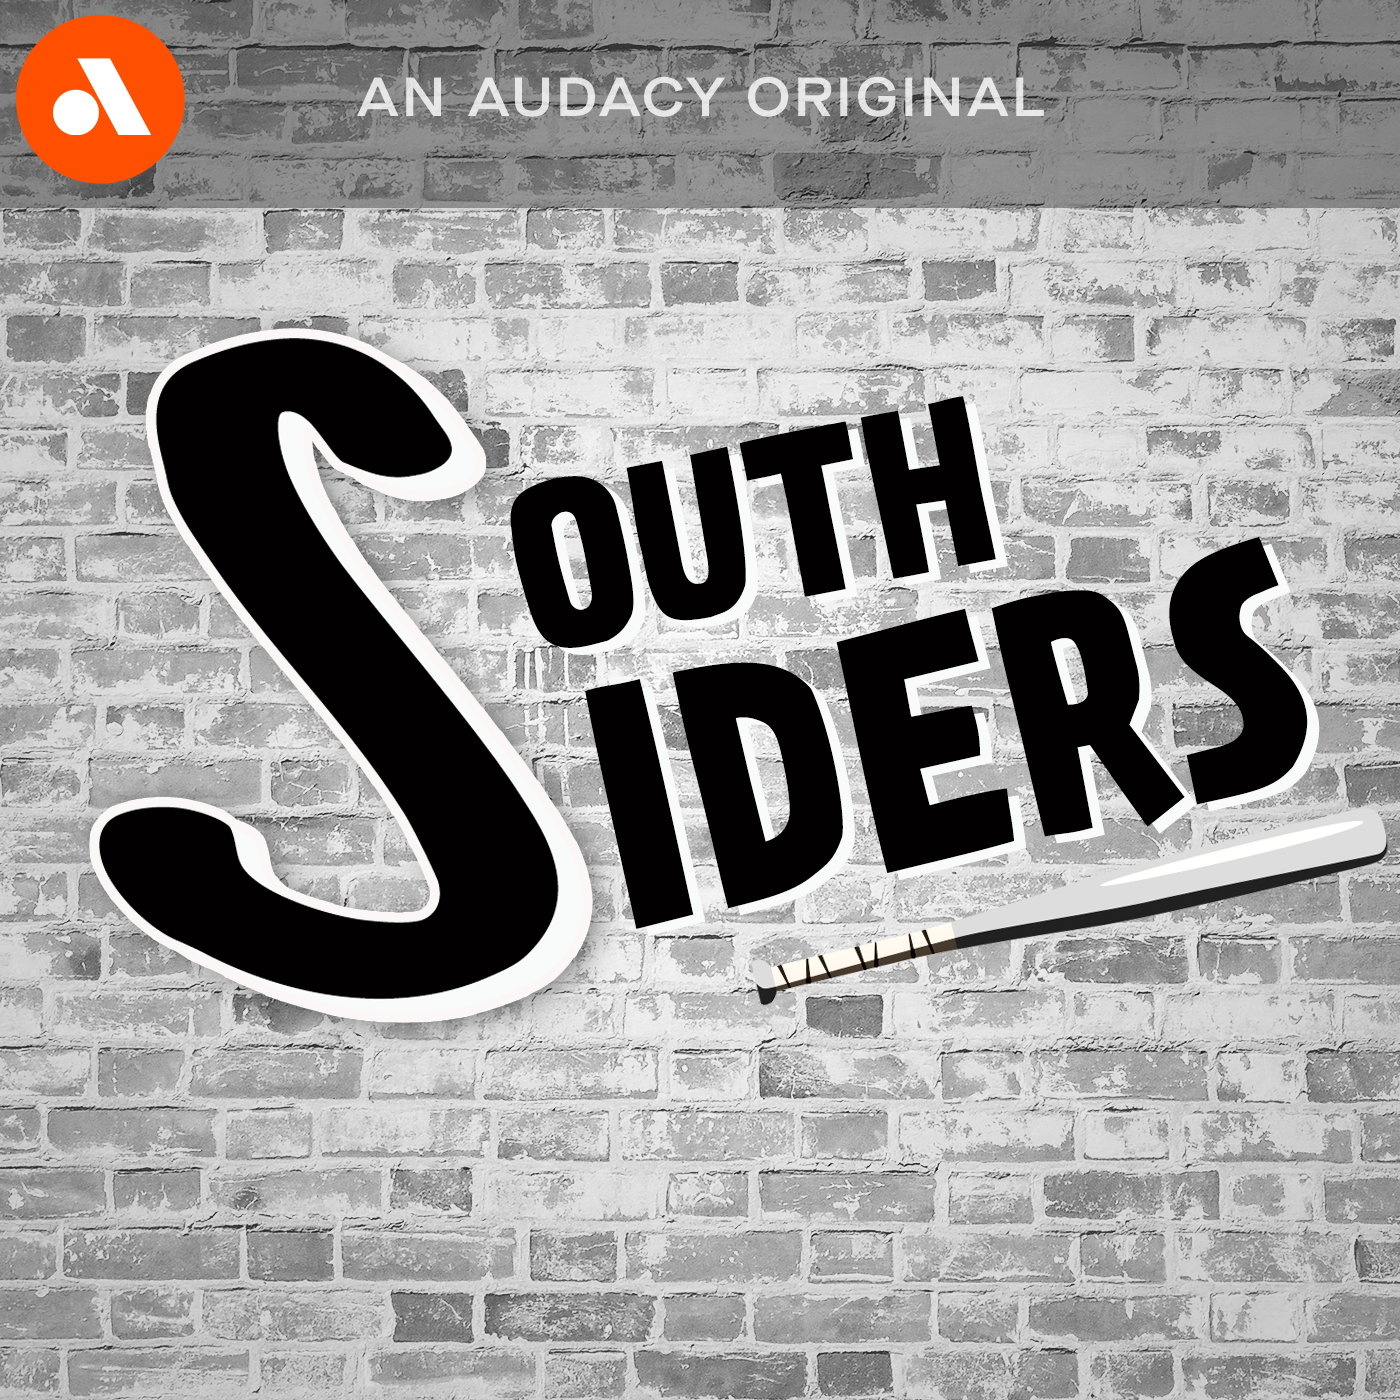 BONUS: Is It Normal To Be Mad About Abreu Leaving? | 'South Siders'